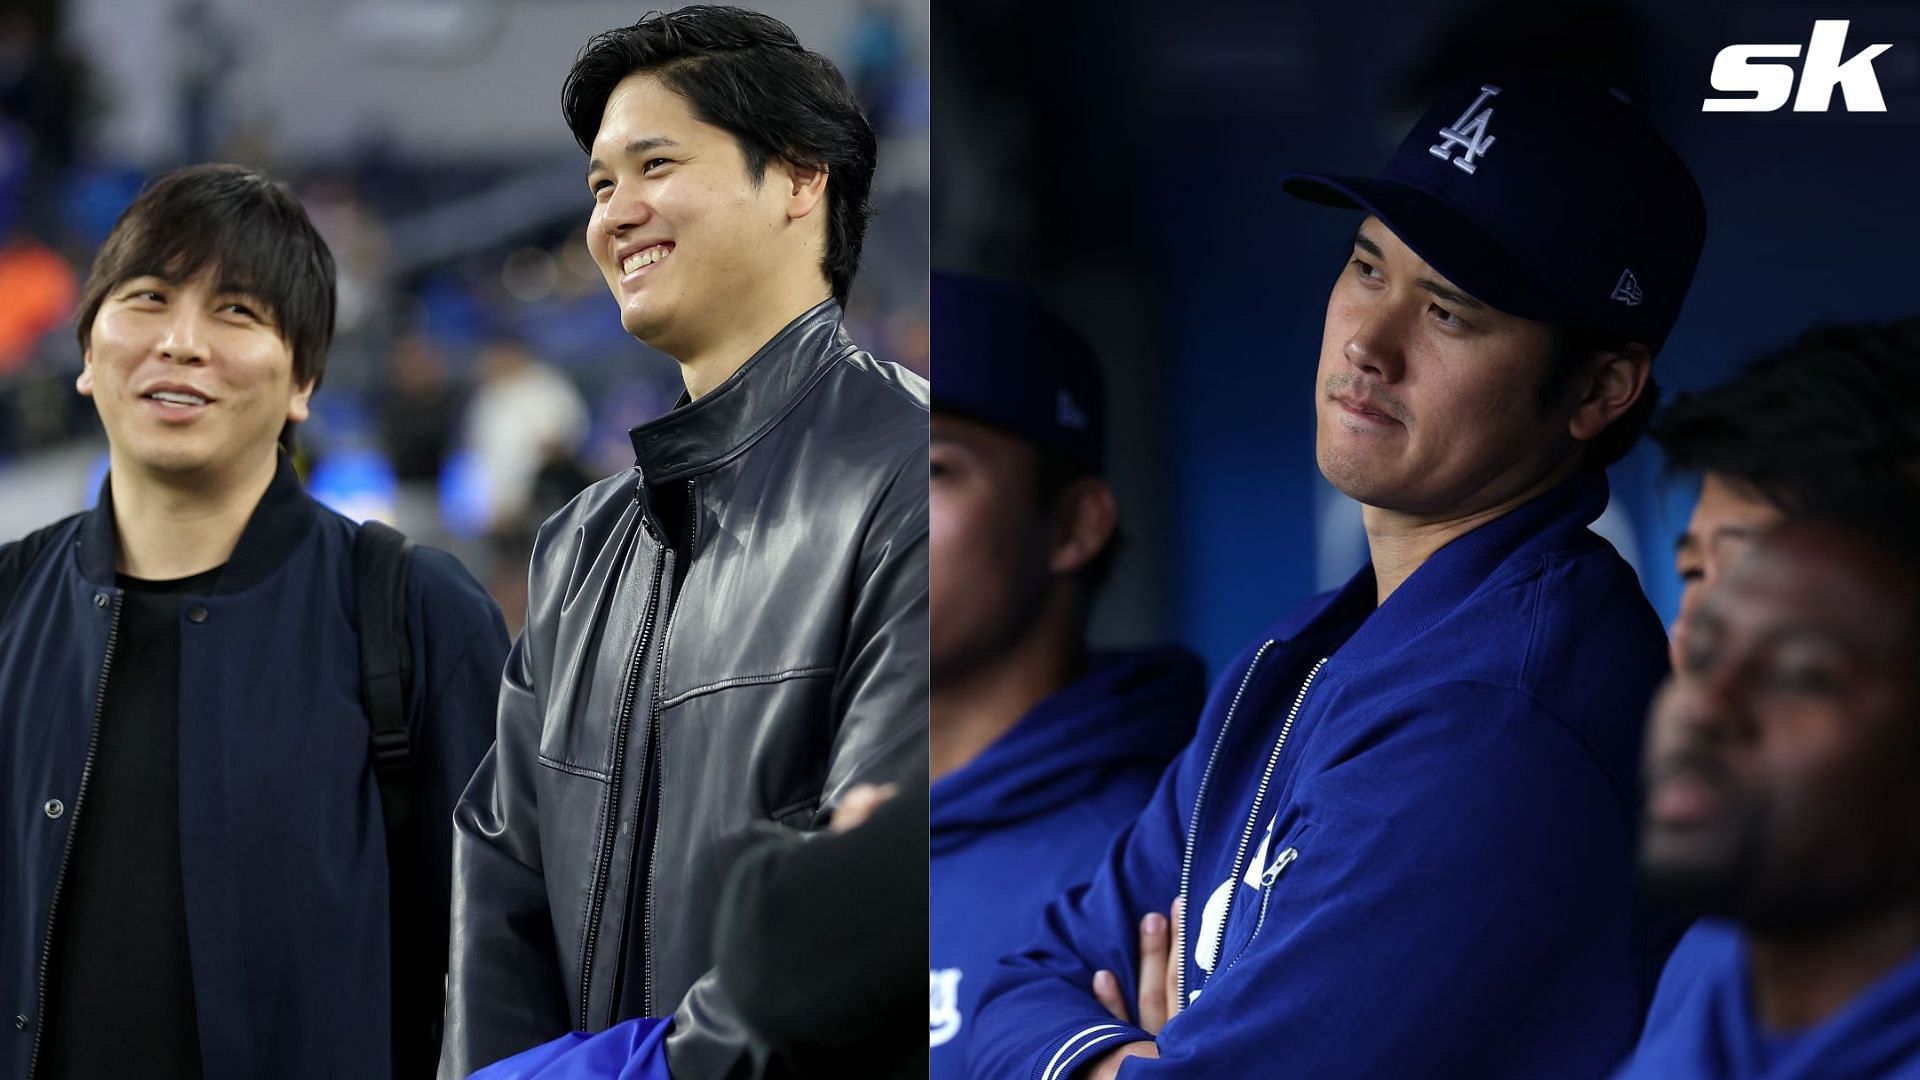 Matthew Bowyer is the illegal bookmaker tied to the Shohei Ohtani-Ippei Mizuhara gambling scandal